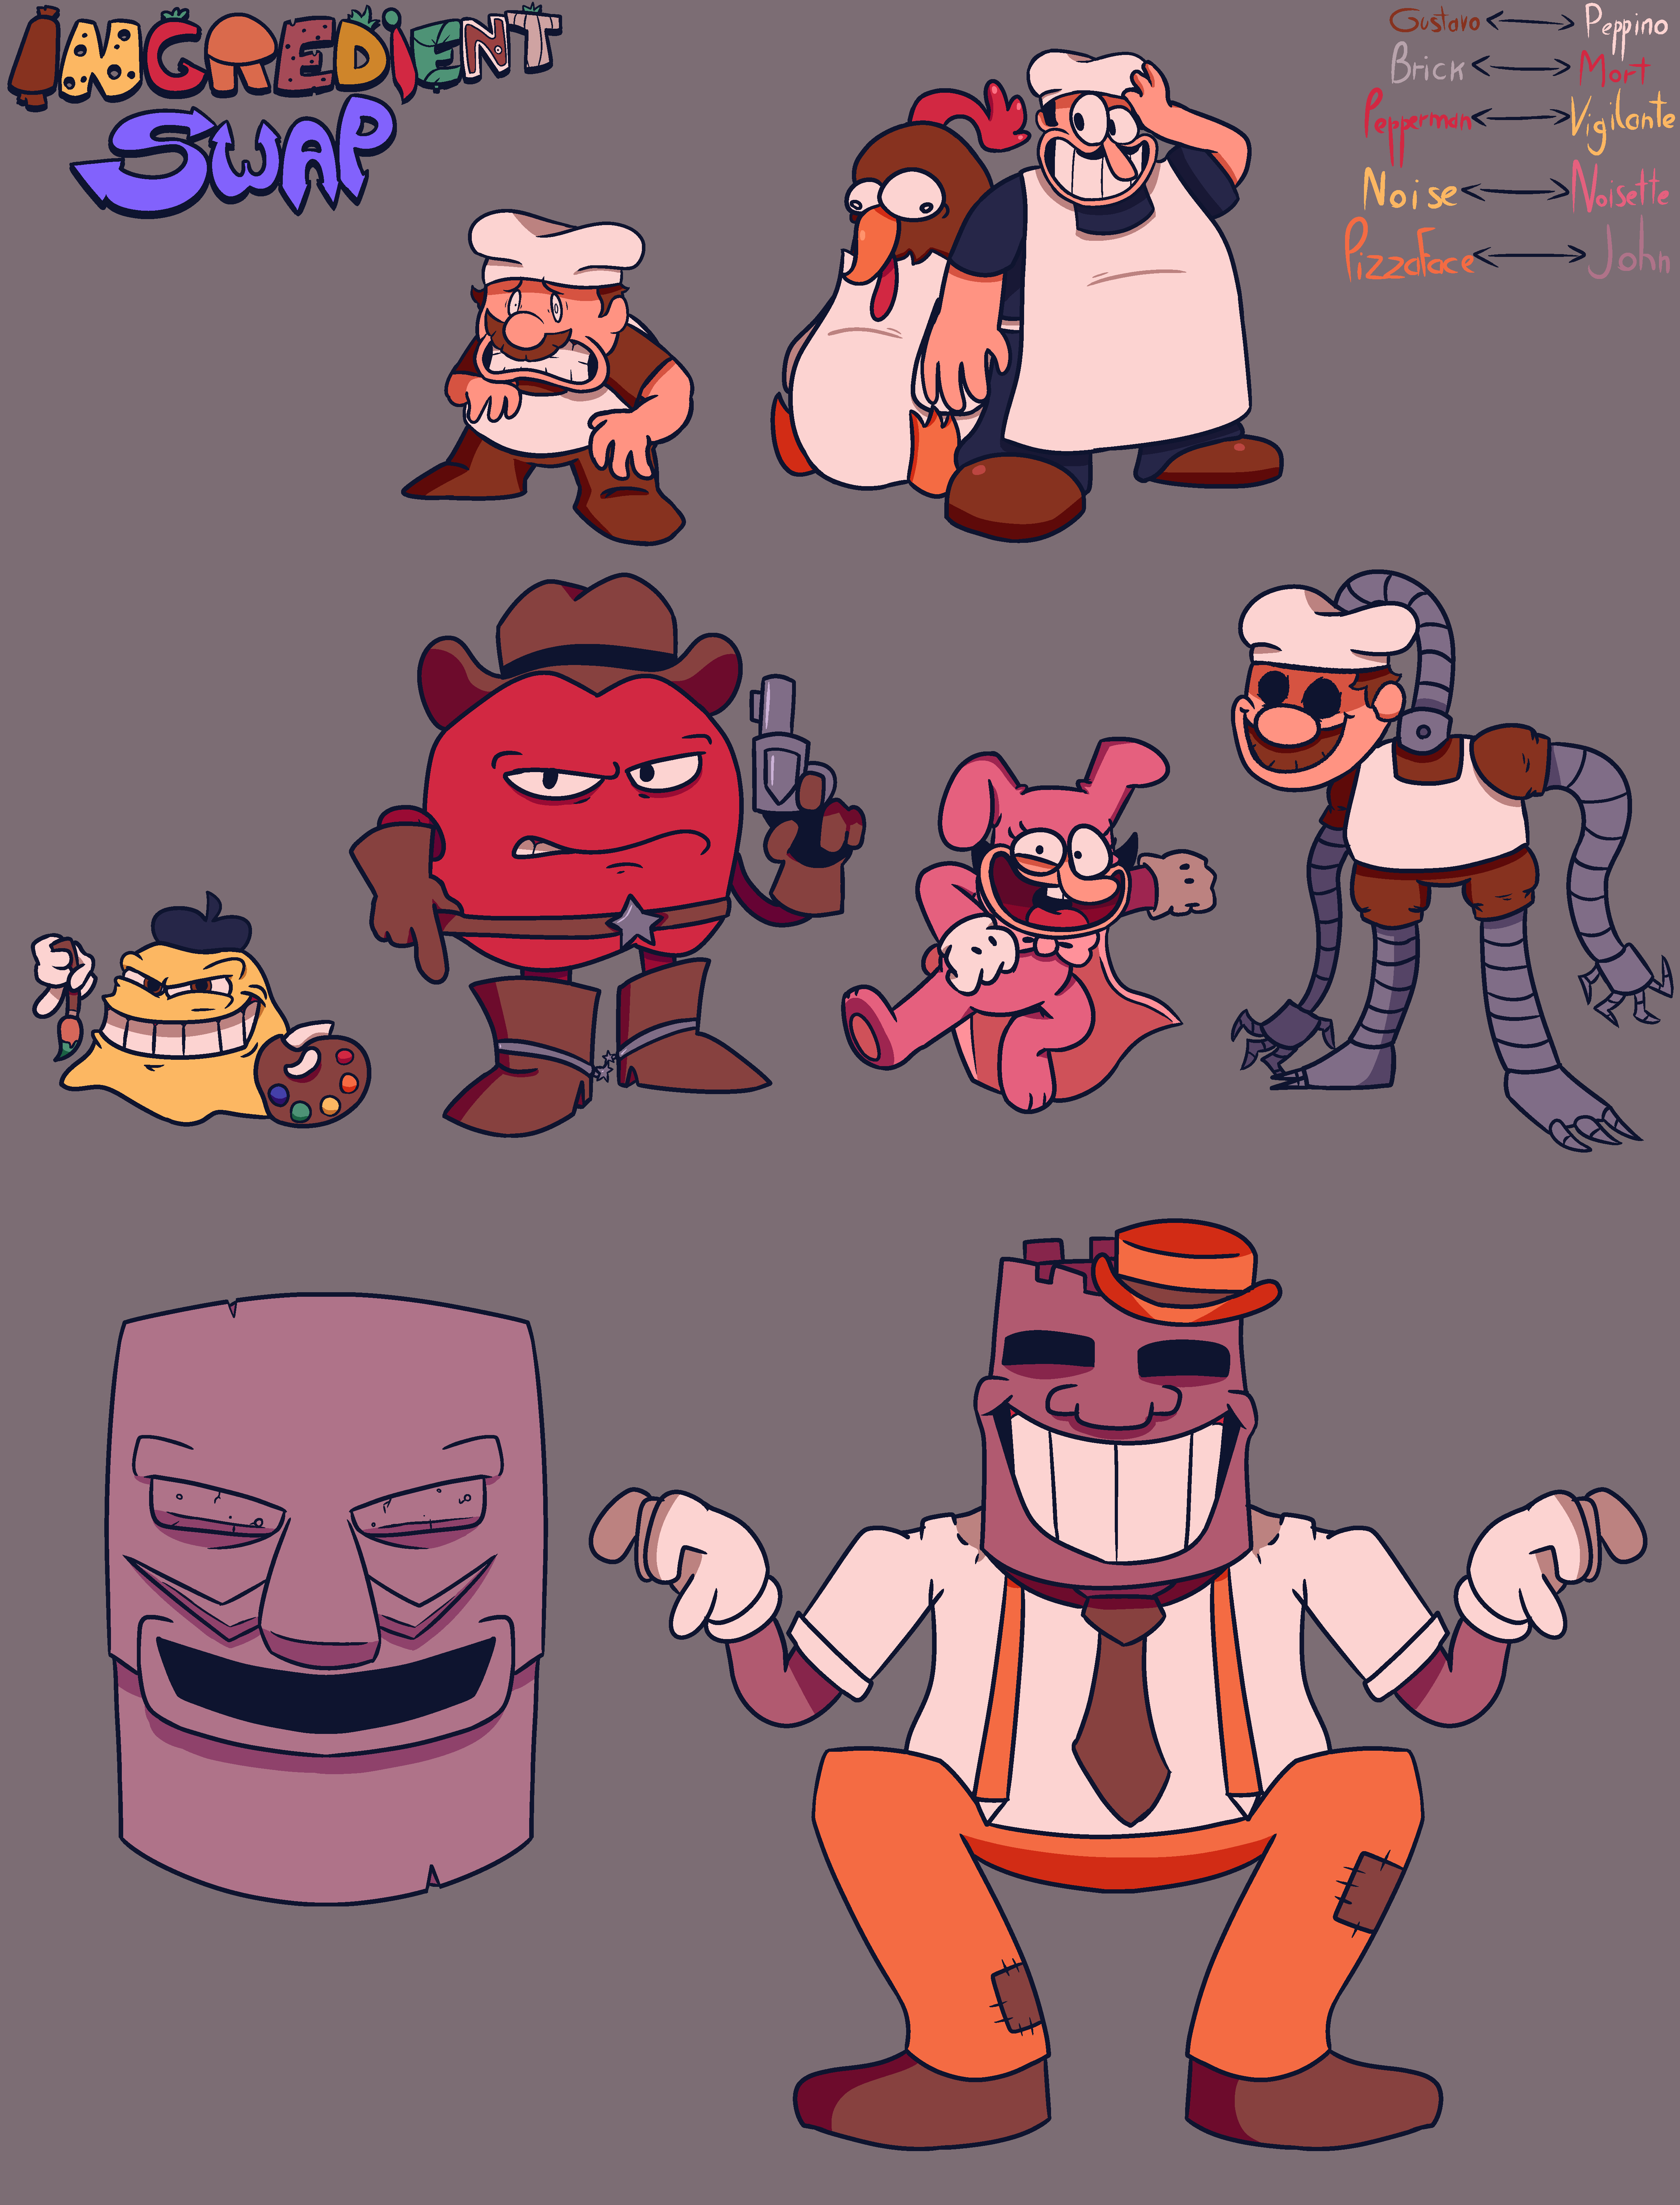 Ingredient Swap] Main Characters by VolteonK on DeviantArt